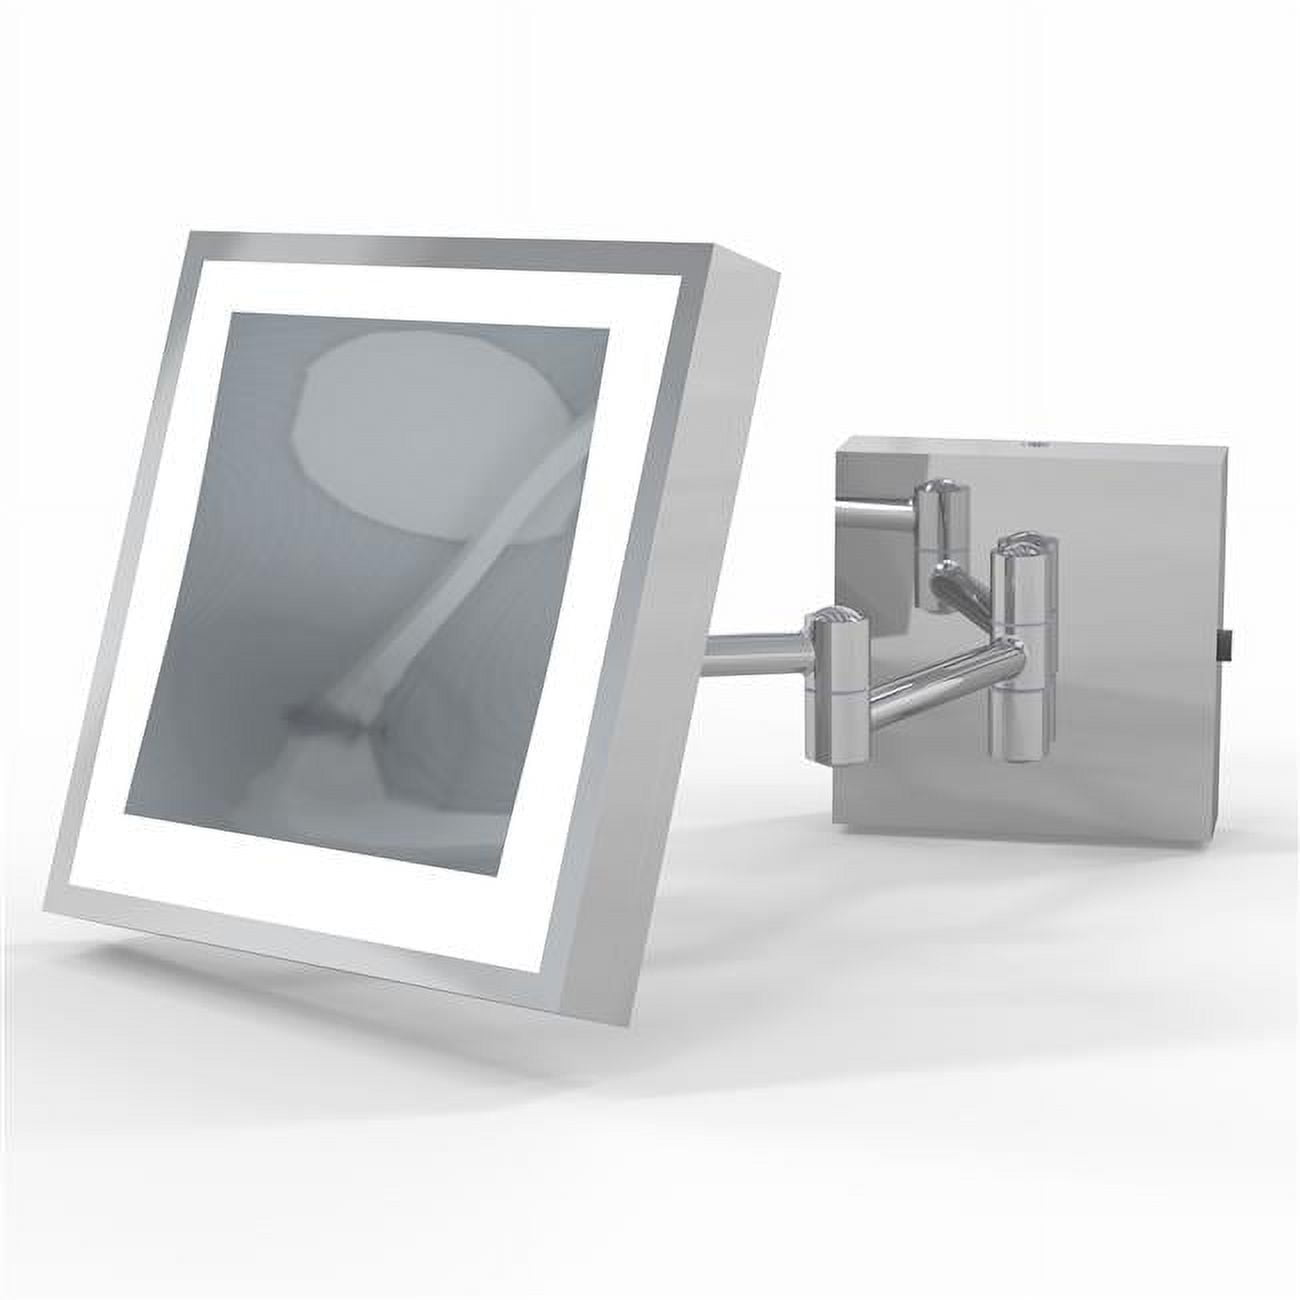 Aptations 913-35-43 Single-sided Led Square Wall Mirror - Rechargeable, Chrome